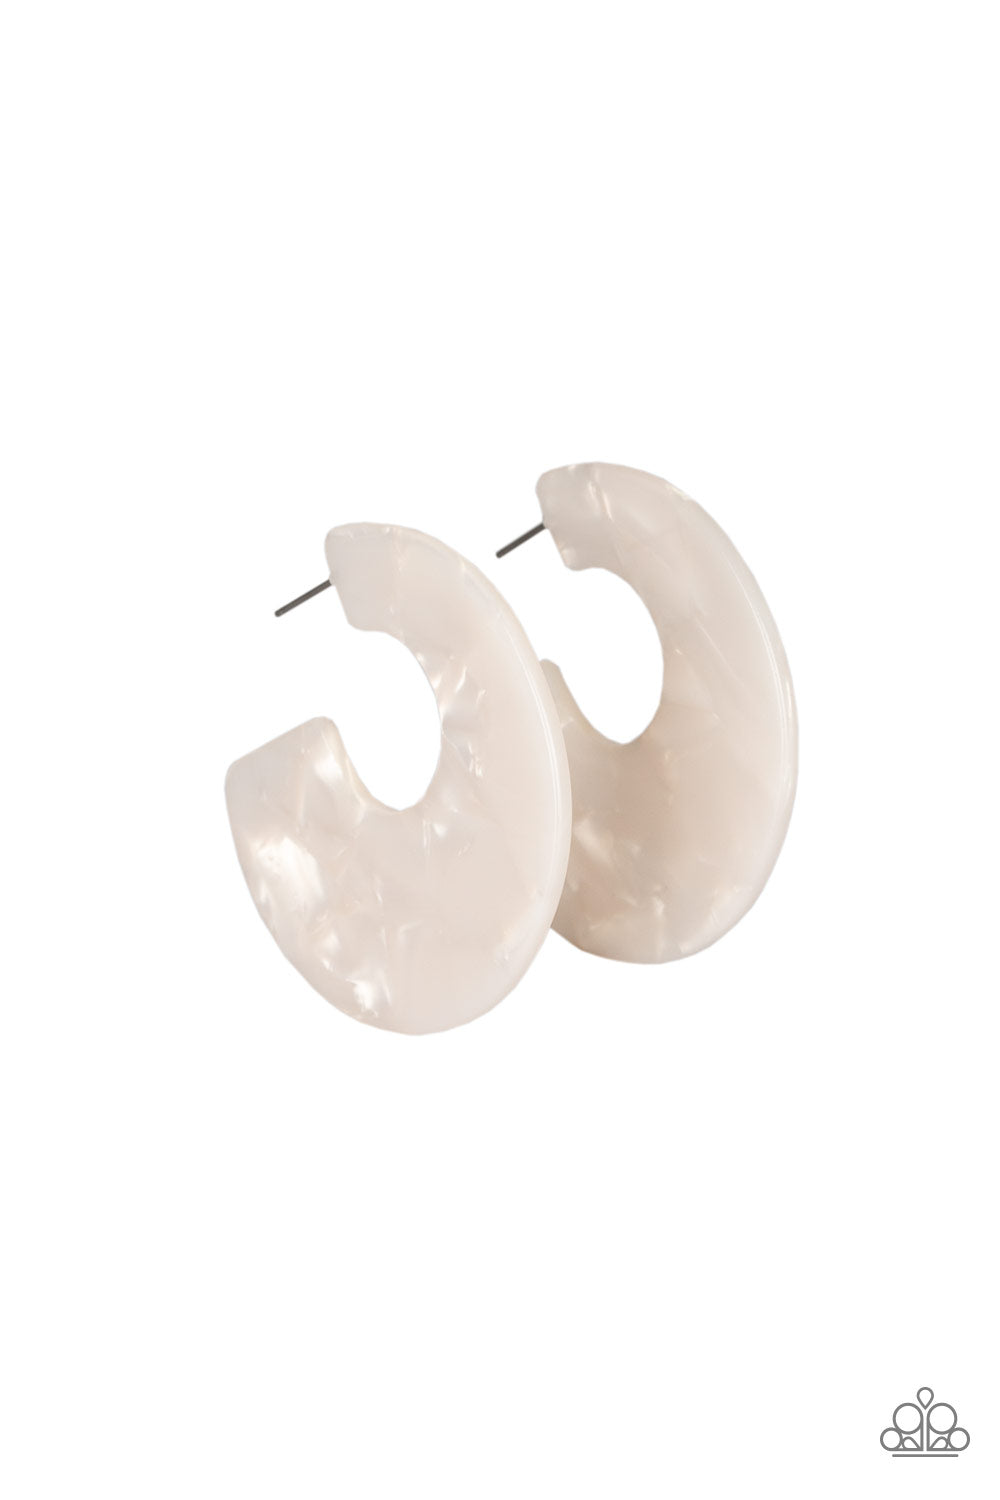 Tropically Torrid White Hoop Earring - Paparazzi Accessories.  Item #P5HO-WTXX-059XX Brushed in an iridescent faux marble finish, a flat white hoop curls around the ear for a retro look. Earring attaches to a standard post fitting. Hoop measures 2" in diameter.  Sold as one pair of hoop earrings.